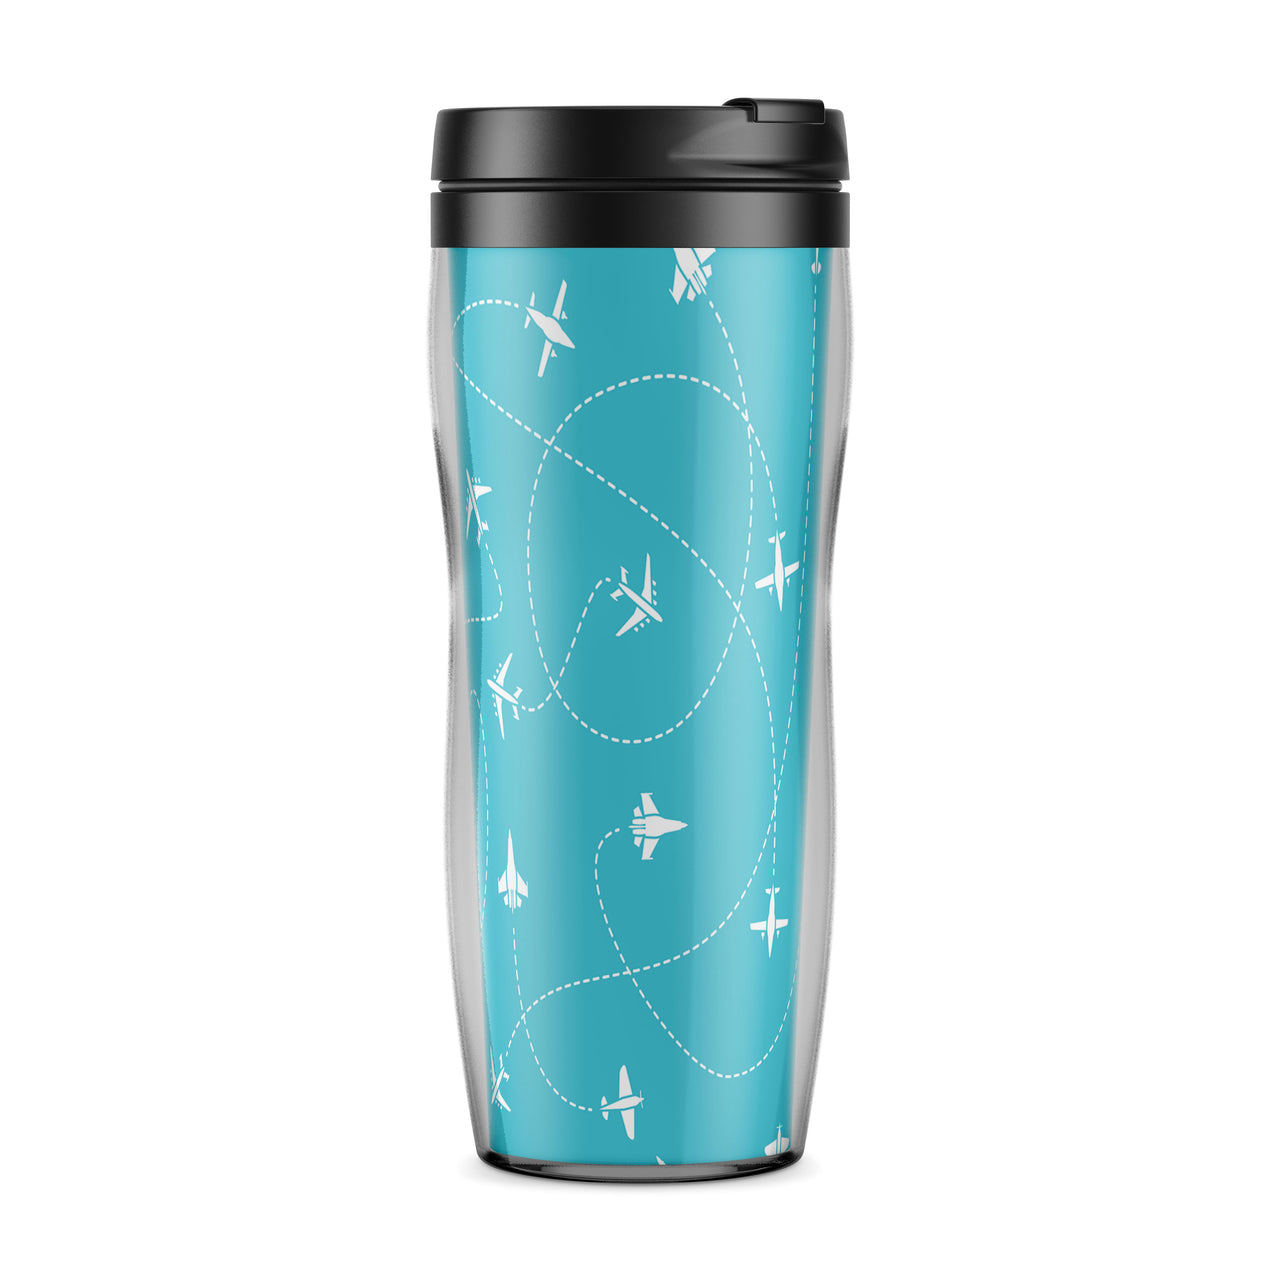 Travel The The World By Plane Designed Plastic Travel Mugs